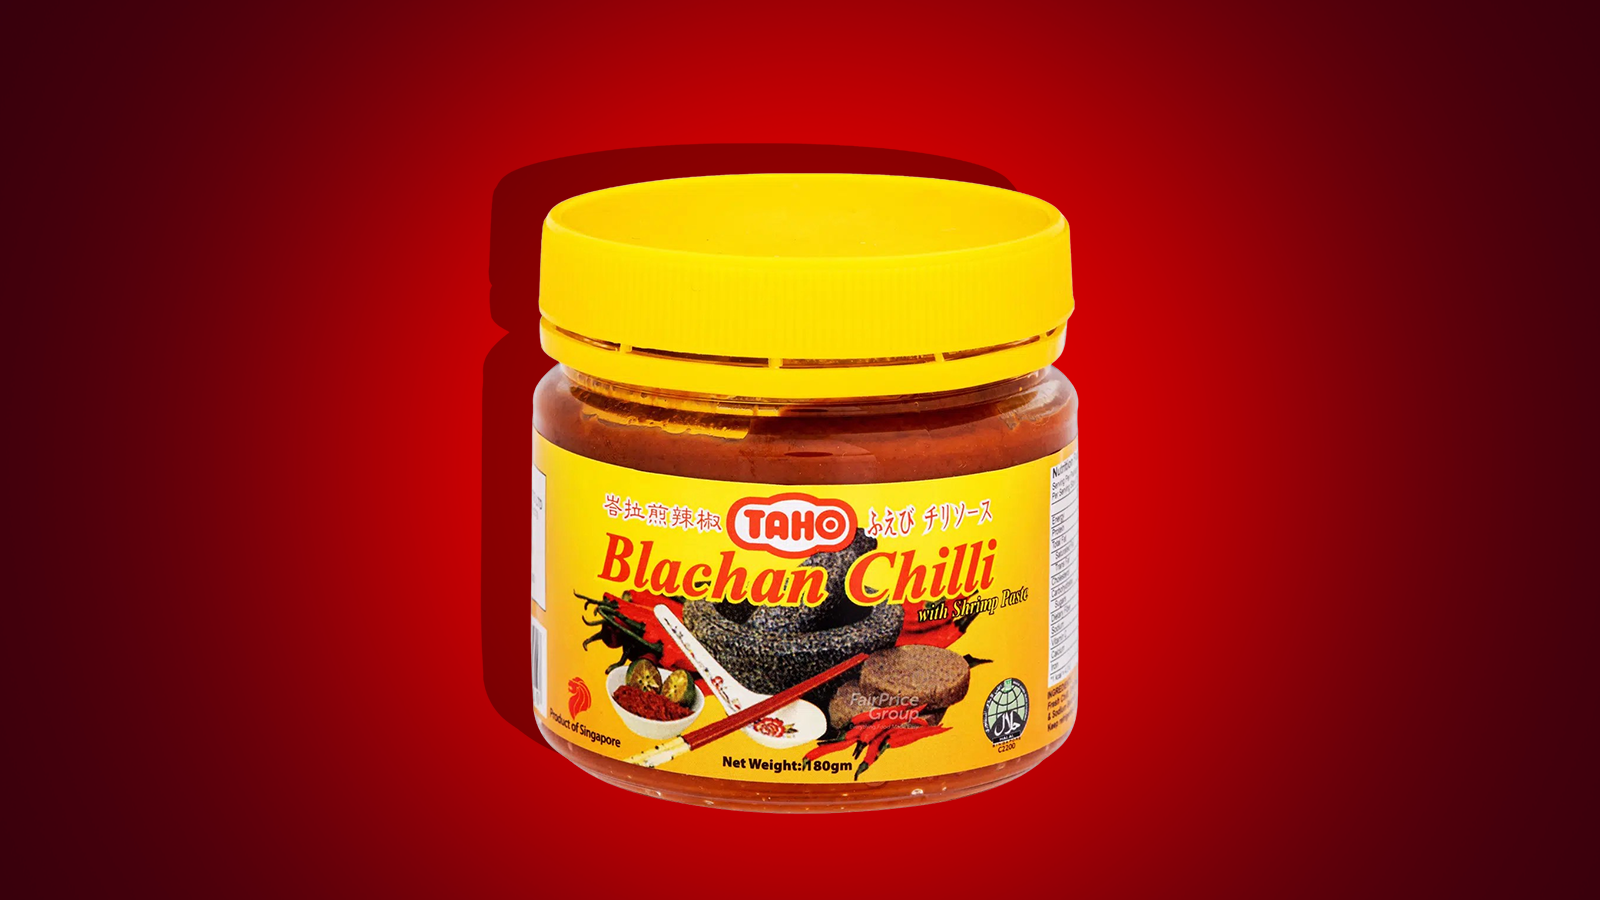 A jar of Tacho Blachan Chilli against a red backdrop. Photo collage.